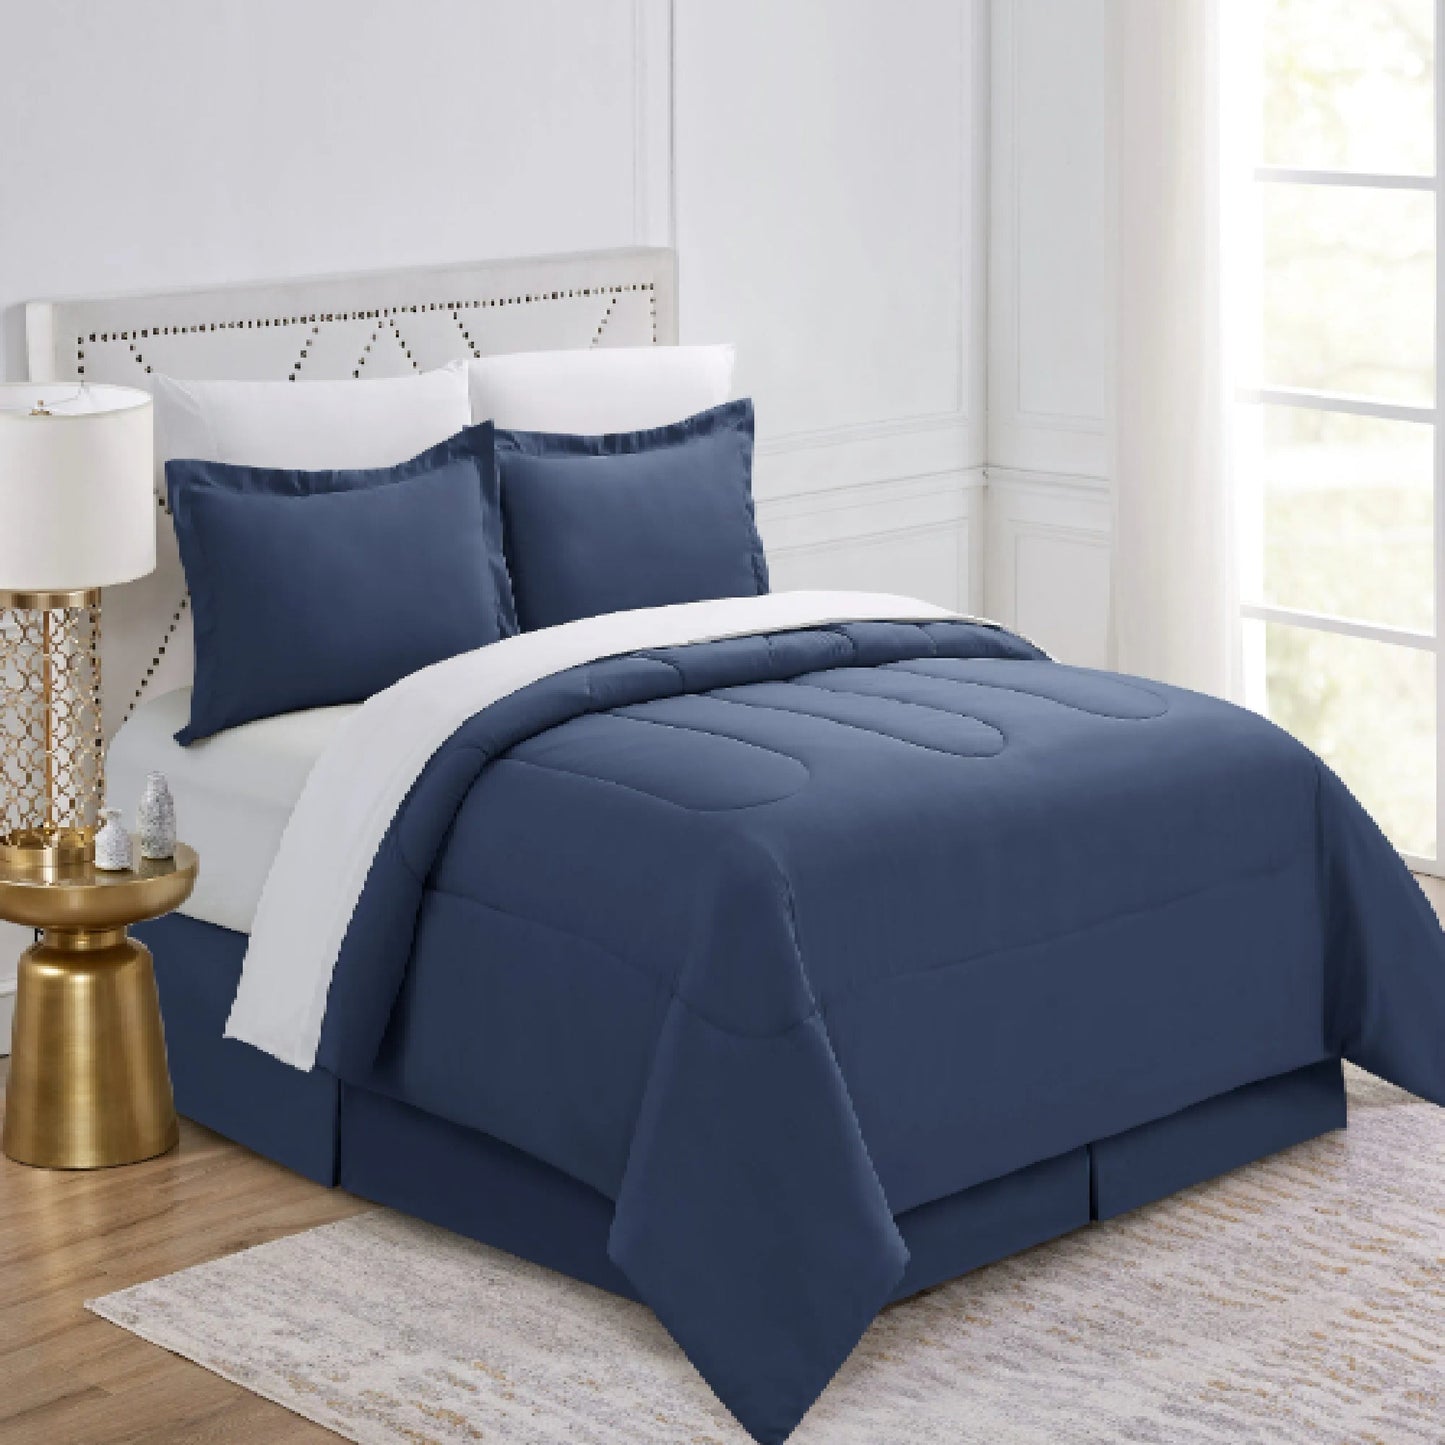 Intricate Pinch Pleat Pattern for a Relaxing Bedroom Ambiance - Navy